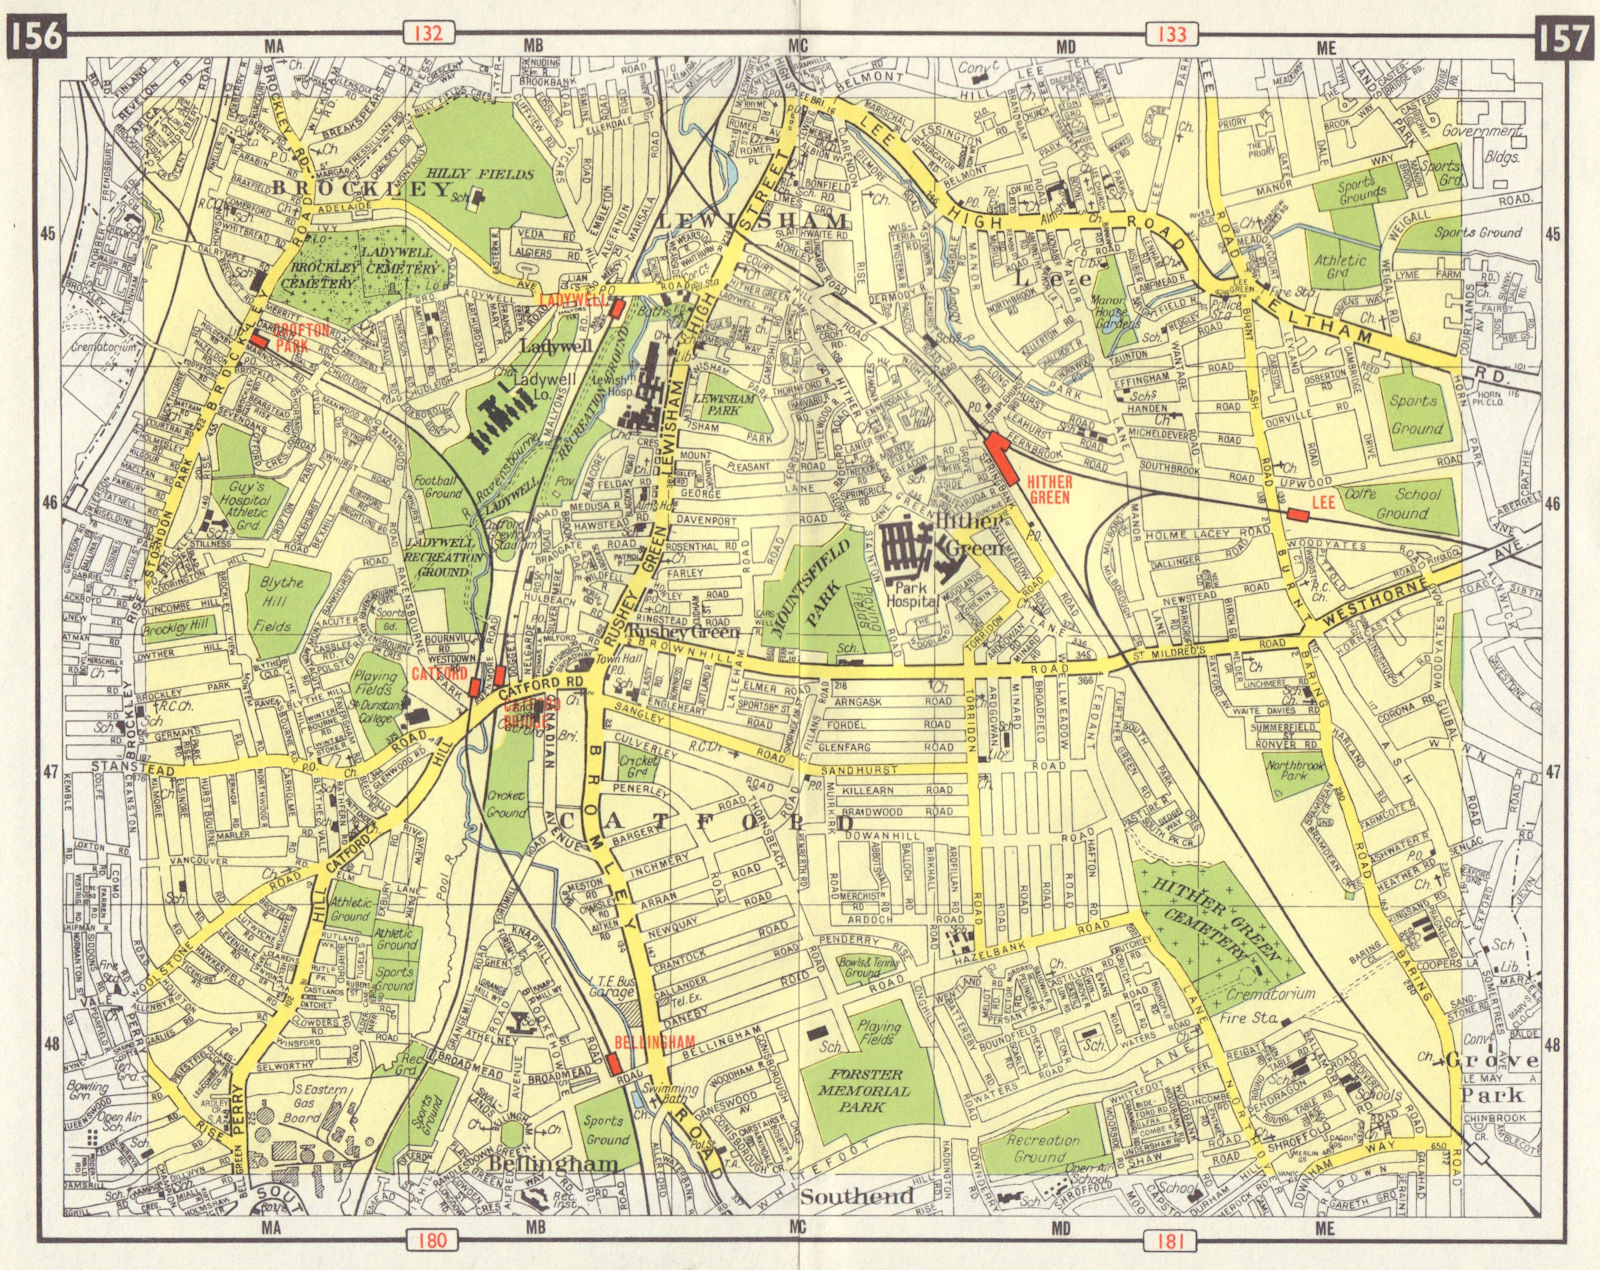 SE LONDON Catford Bellingham Hither Green Lewisham Lee Ladywell 1965 old map